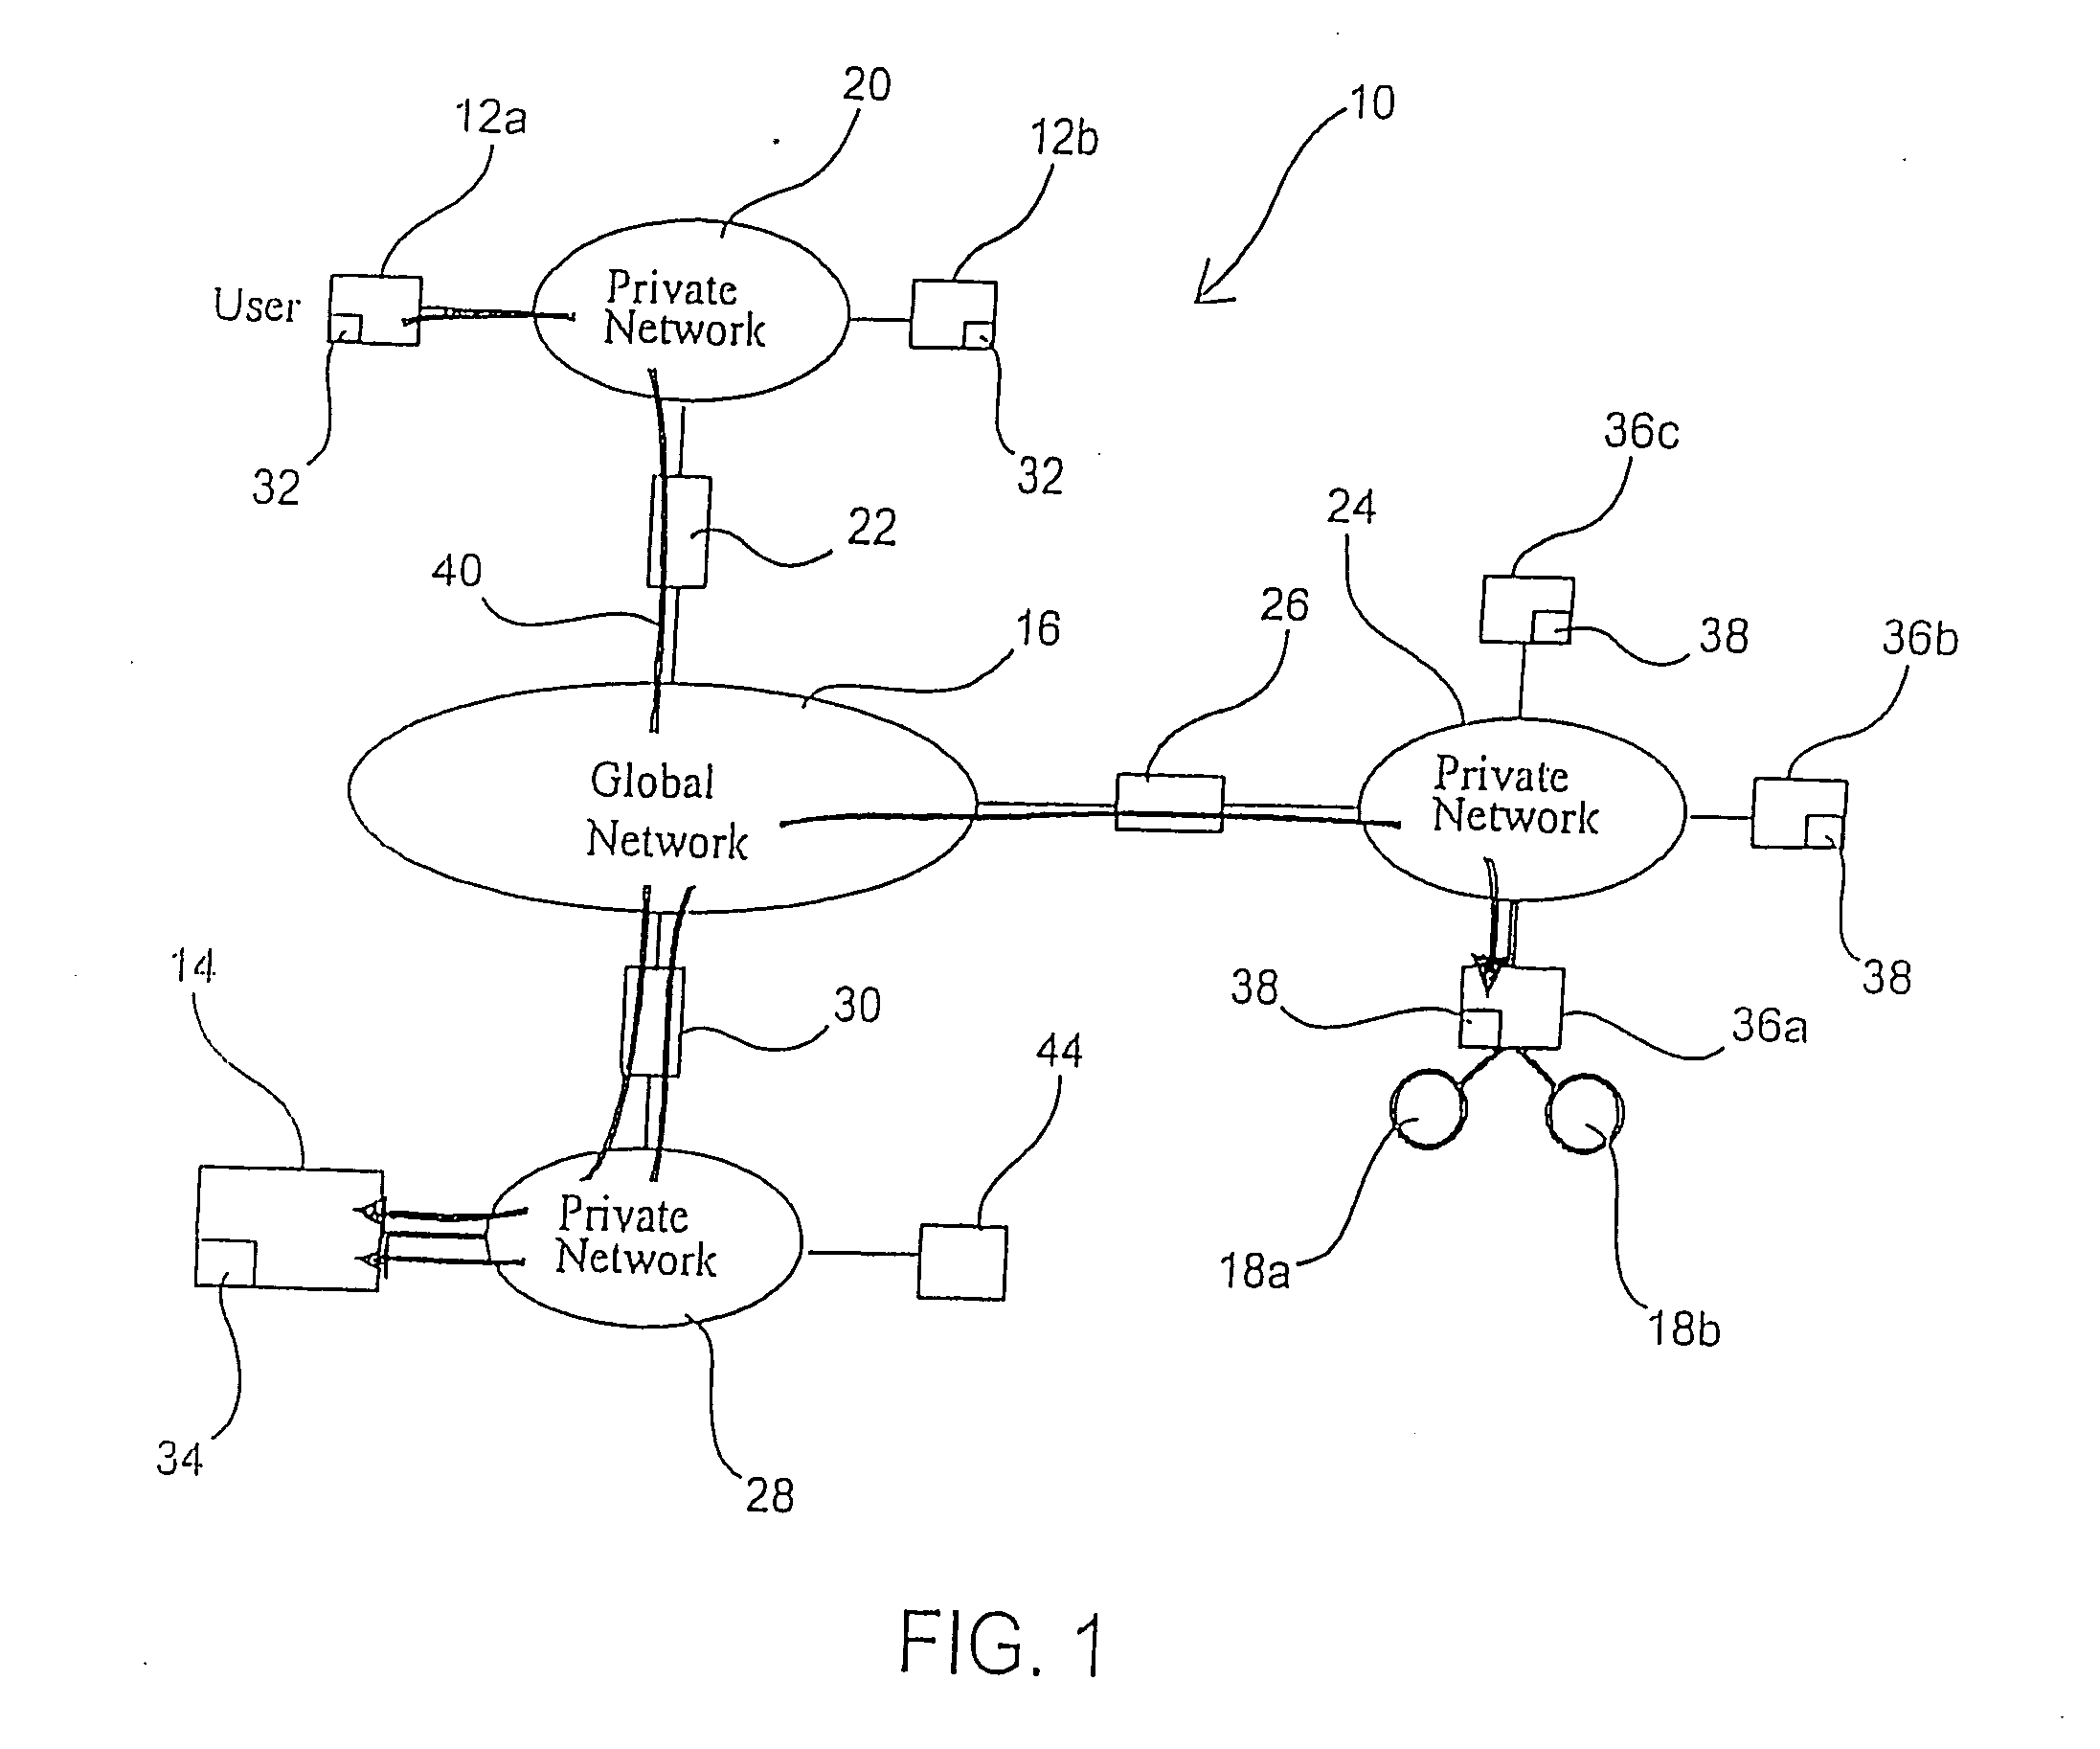 Managed peer-to-peer applications, systems and methods for distributed data access and storage